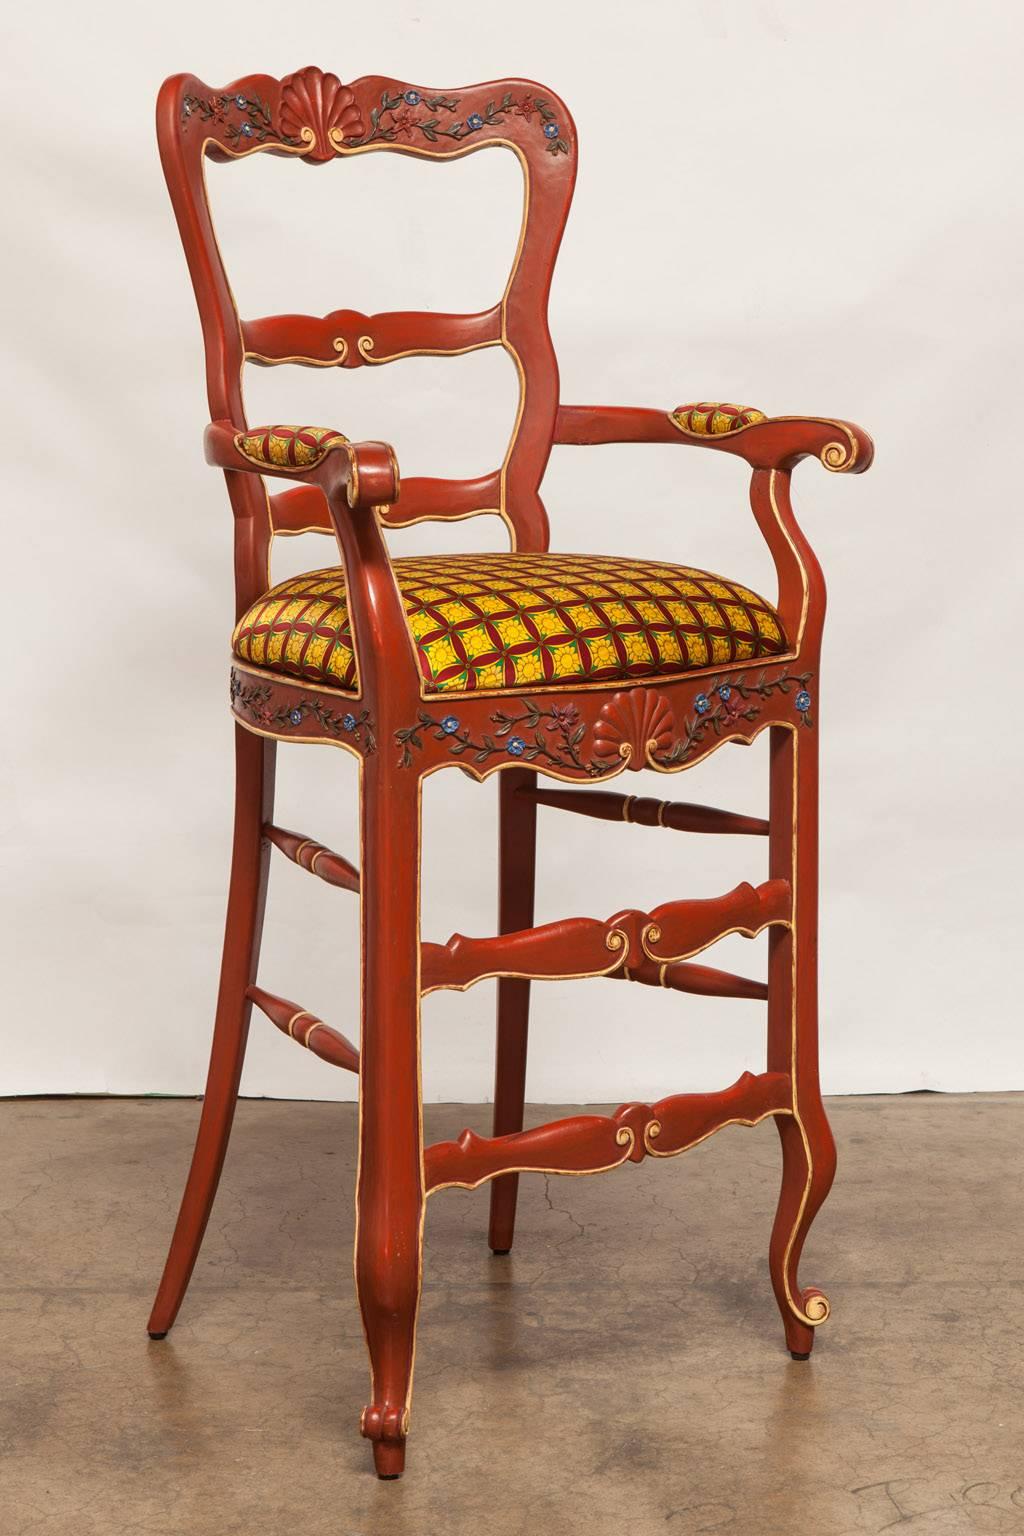 Rare pair of French country relief carved bar stools made in a Provincial style with a wide seat and back. Whimsical hand-carved cabriole legs and scroll arms with a frame decorated with foliate detail and a shell crest and apron. Bright red lacquer